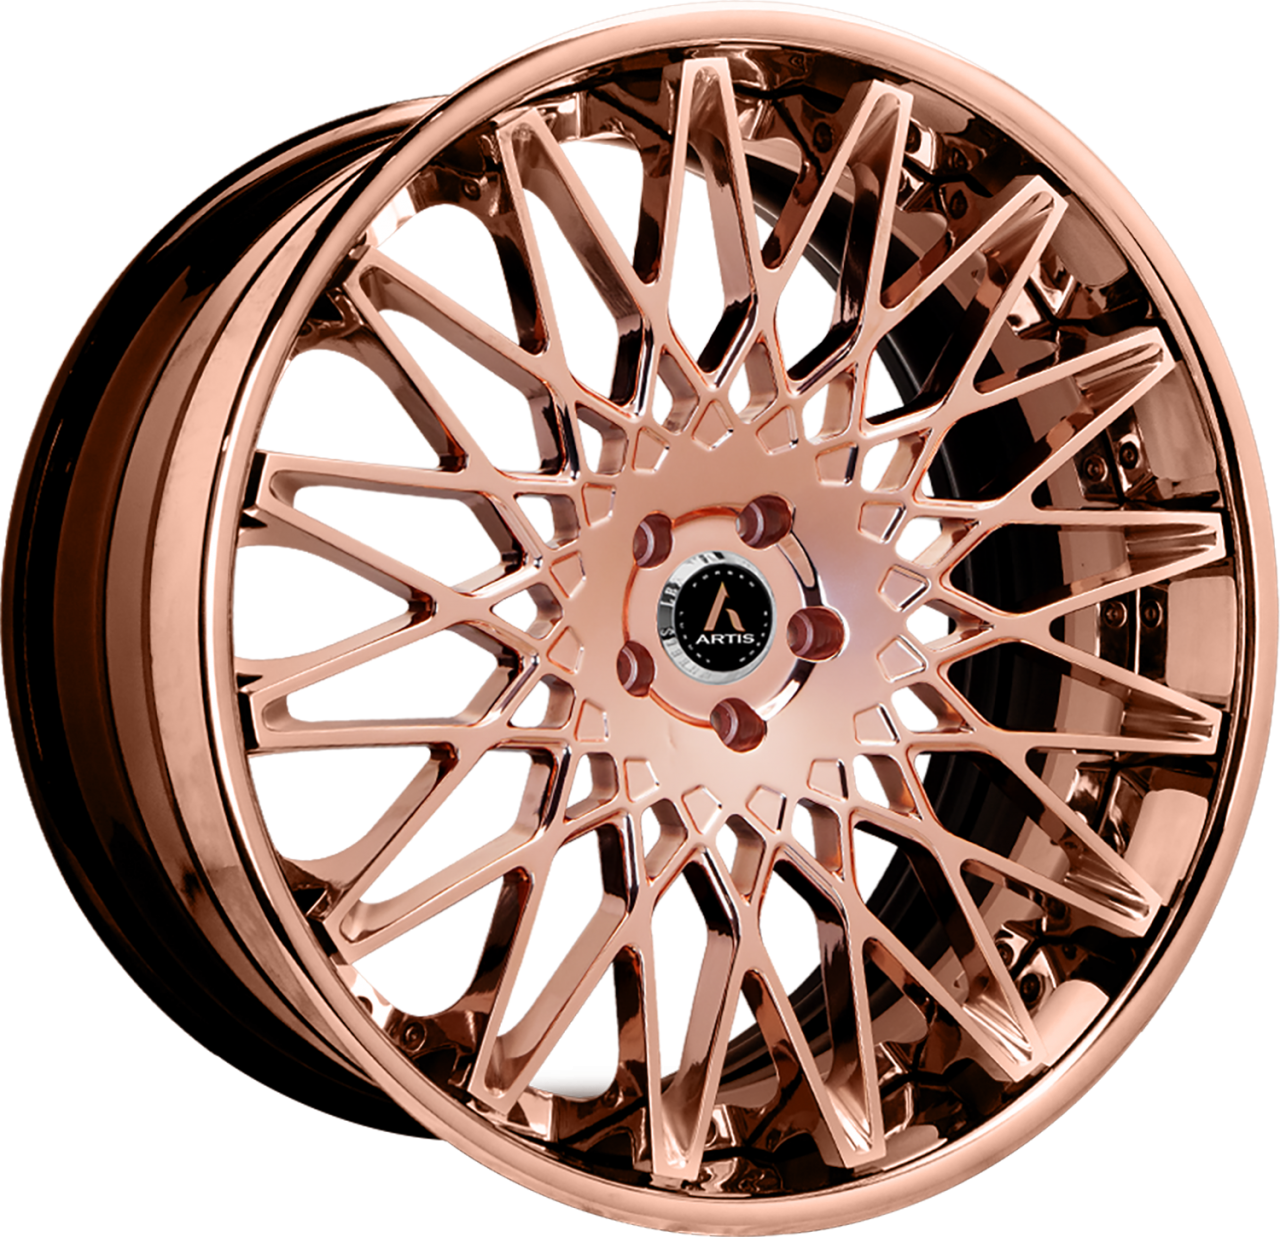 Artis Forged Monza wheel with Rose Gold finish